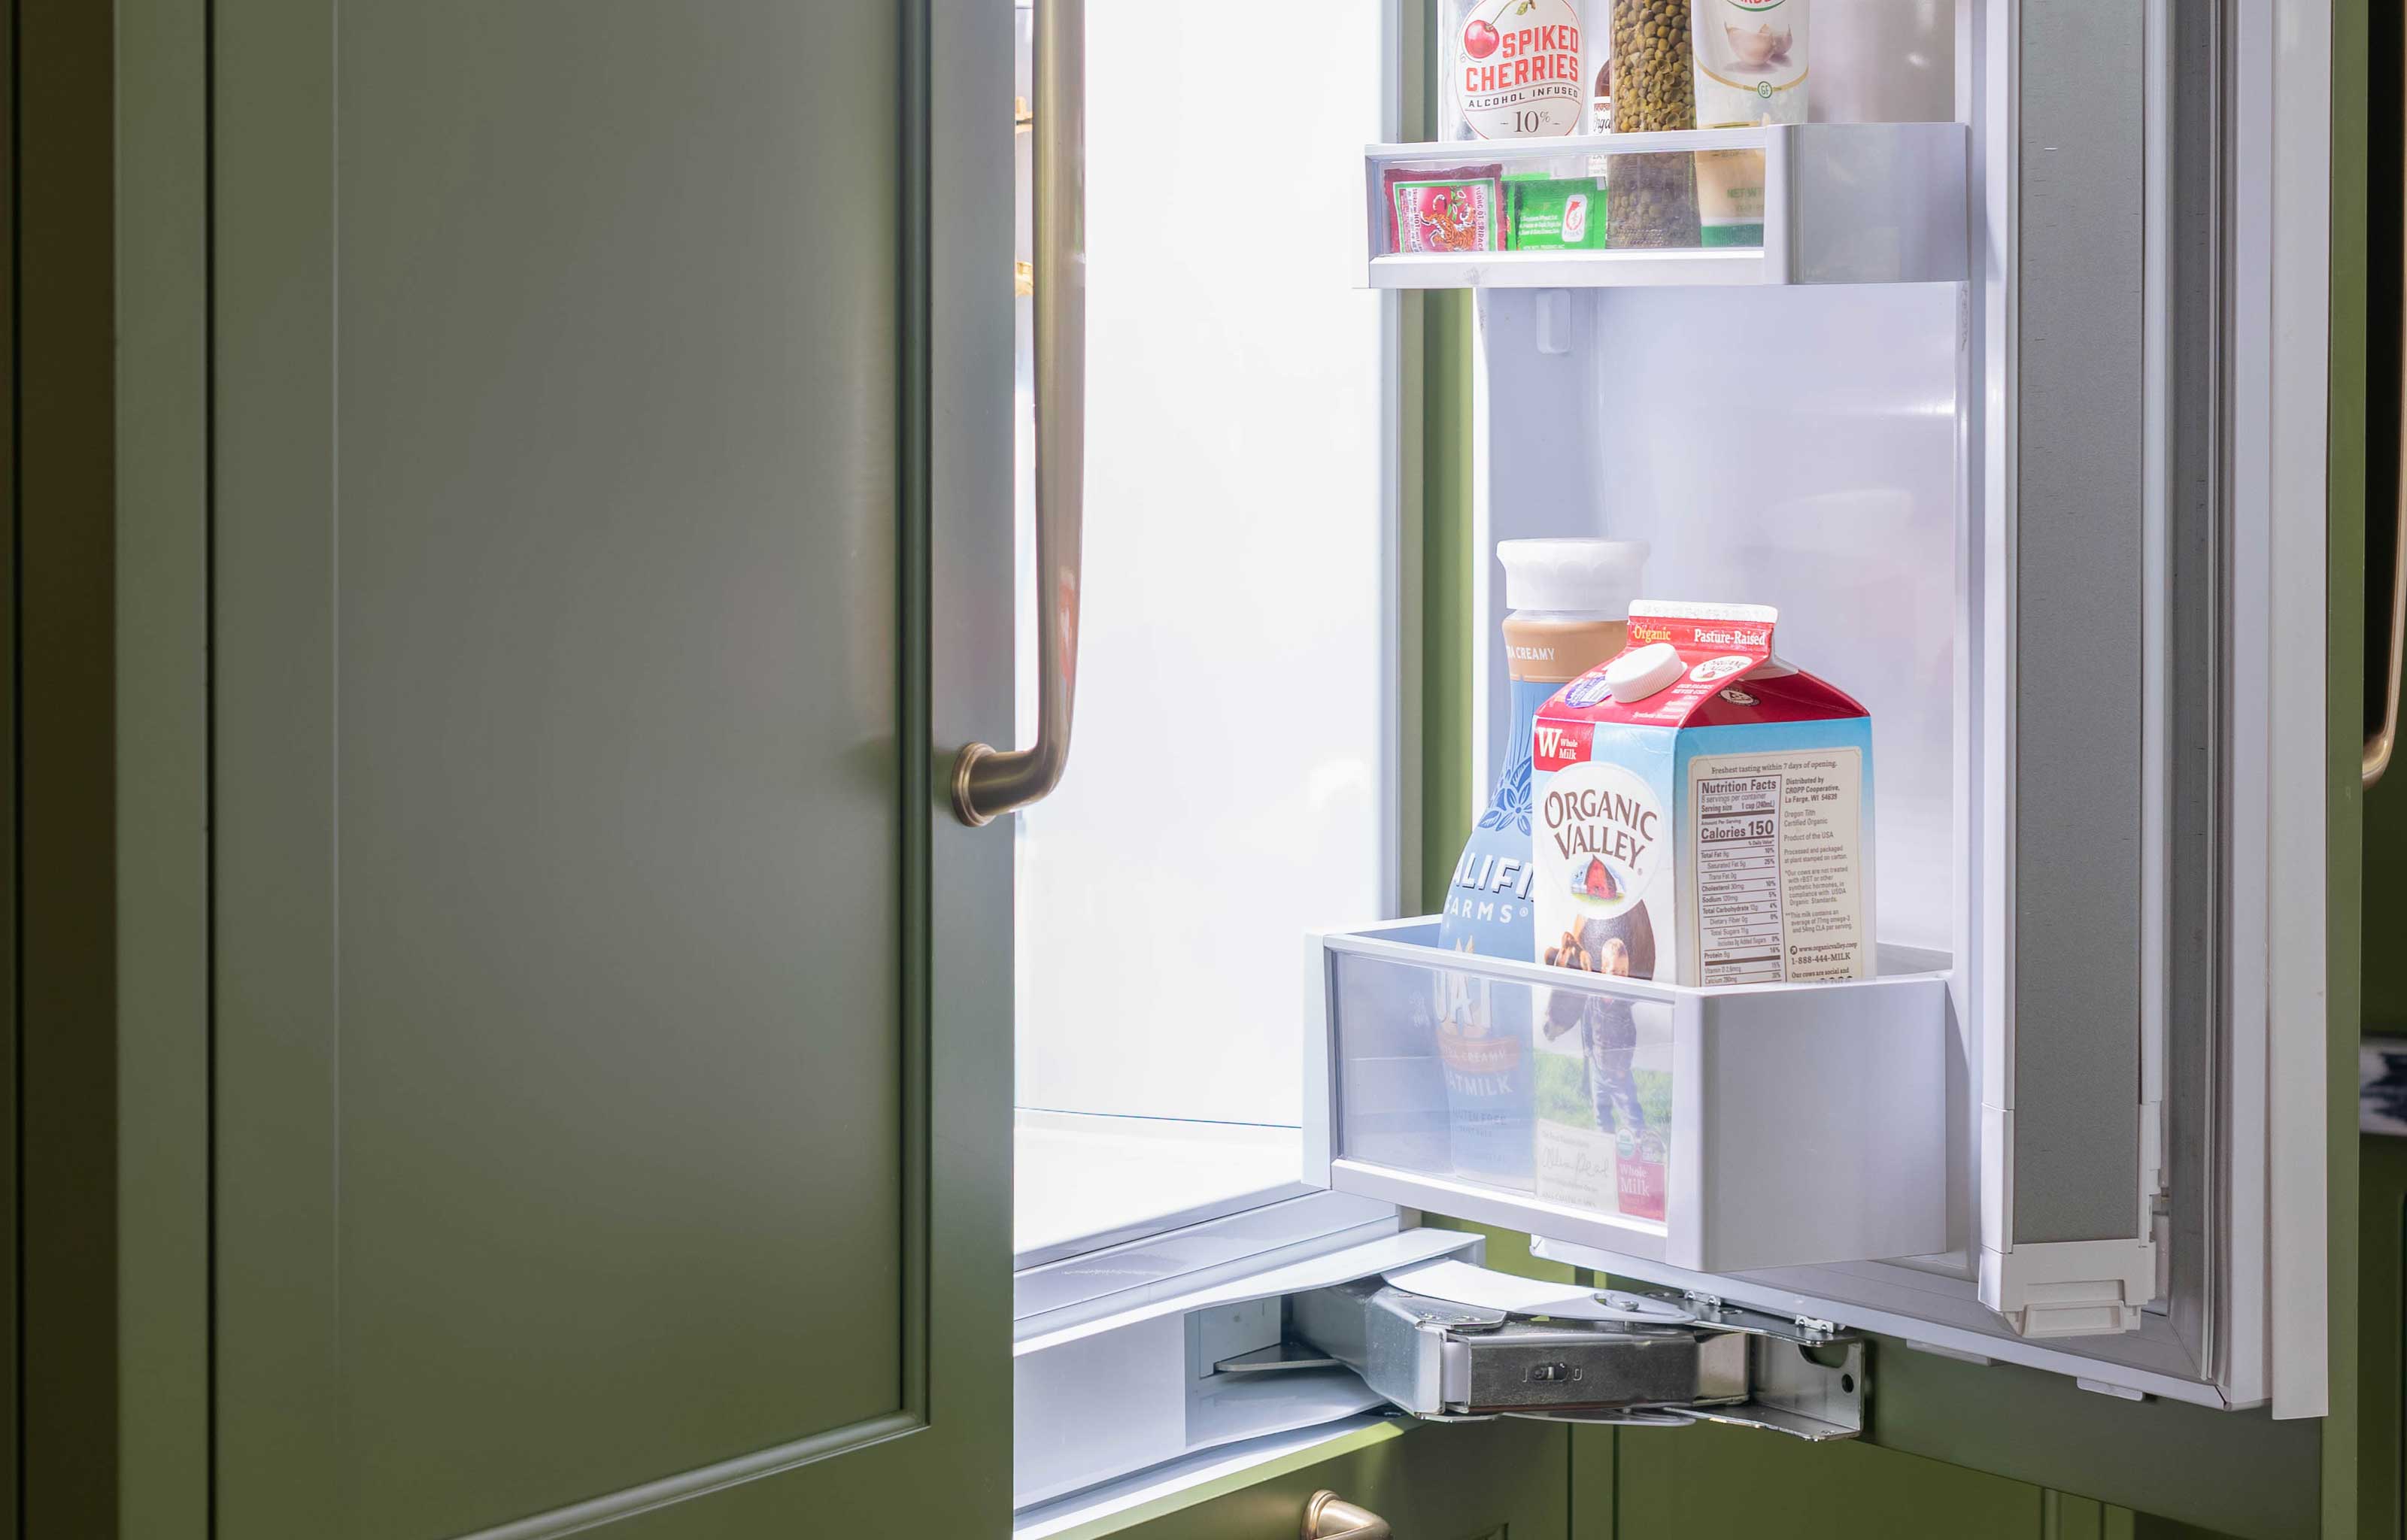 These 6 viral fridge organizers will maximize storage space